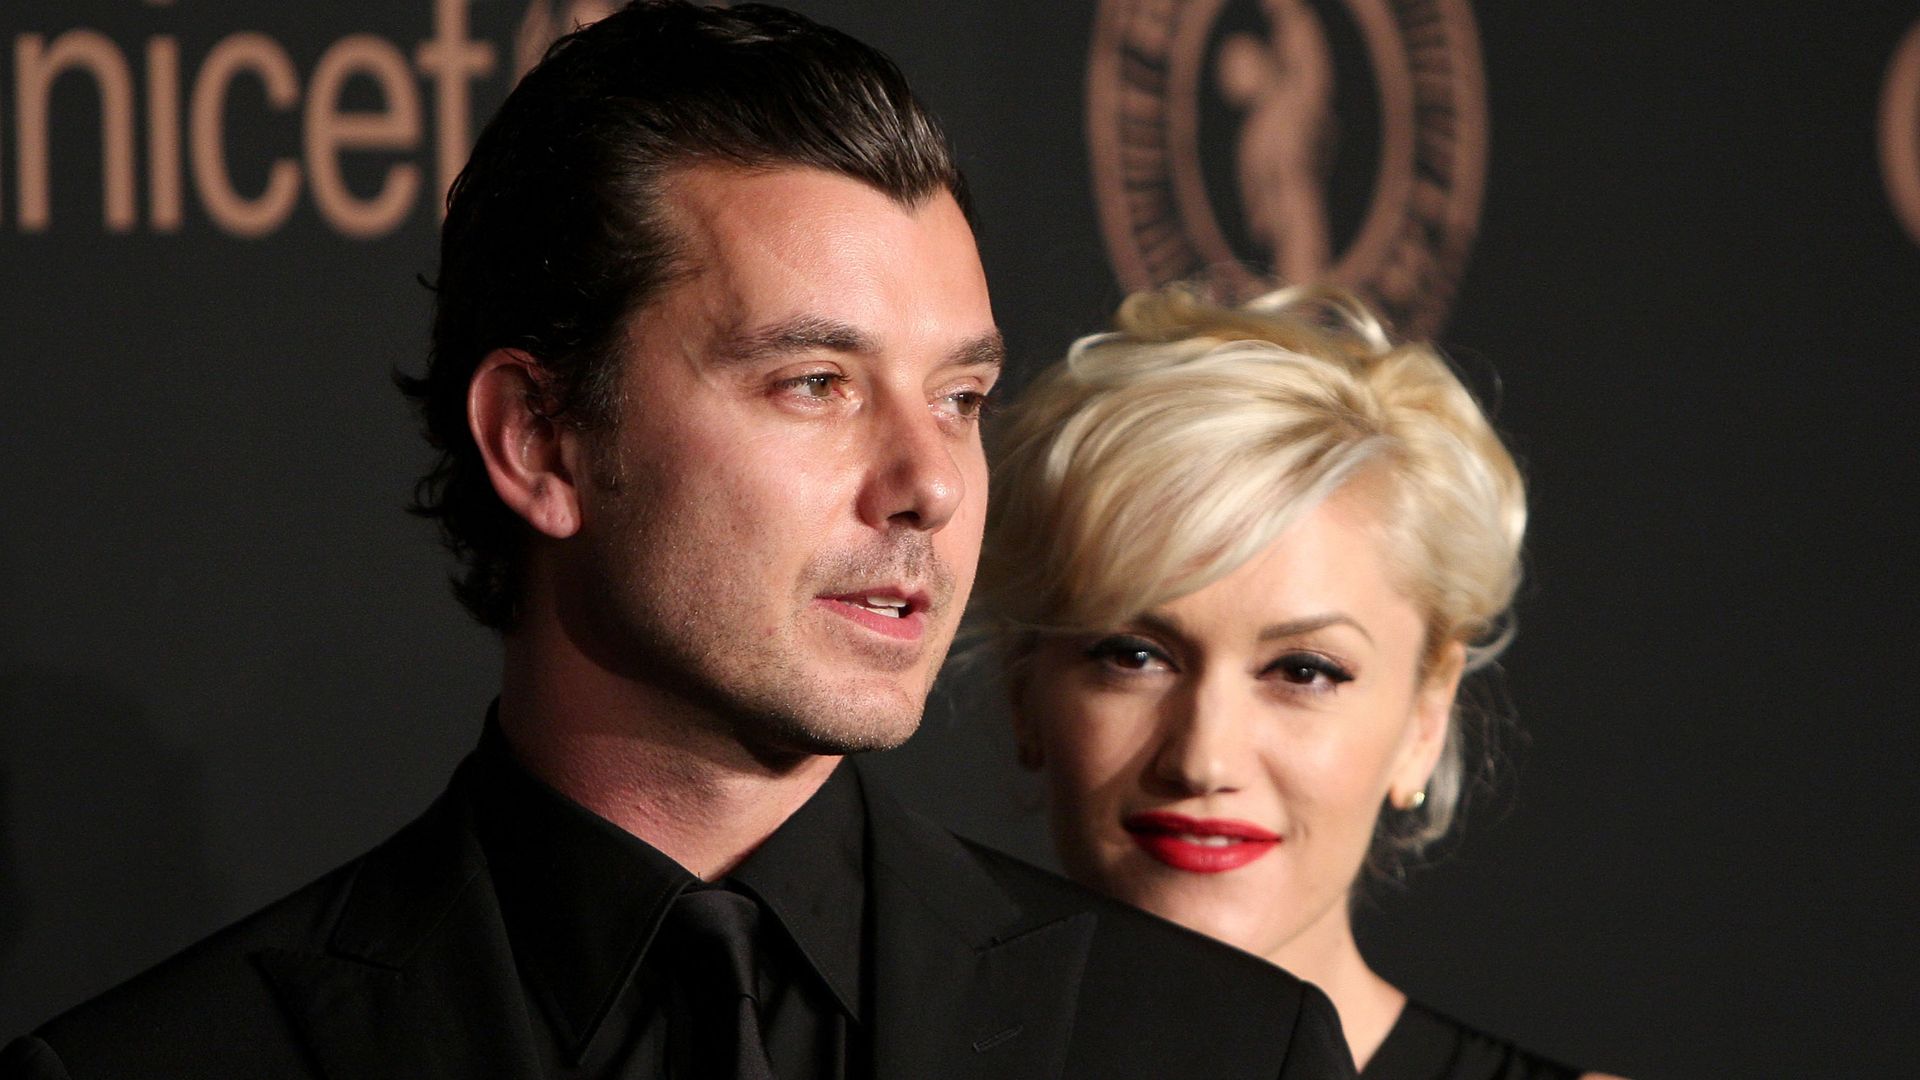 Gavin Rossdale and Gwen Stefani attend "A Night To Benefit Raising Malawi & UNICEF"